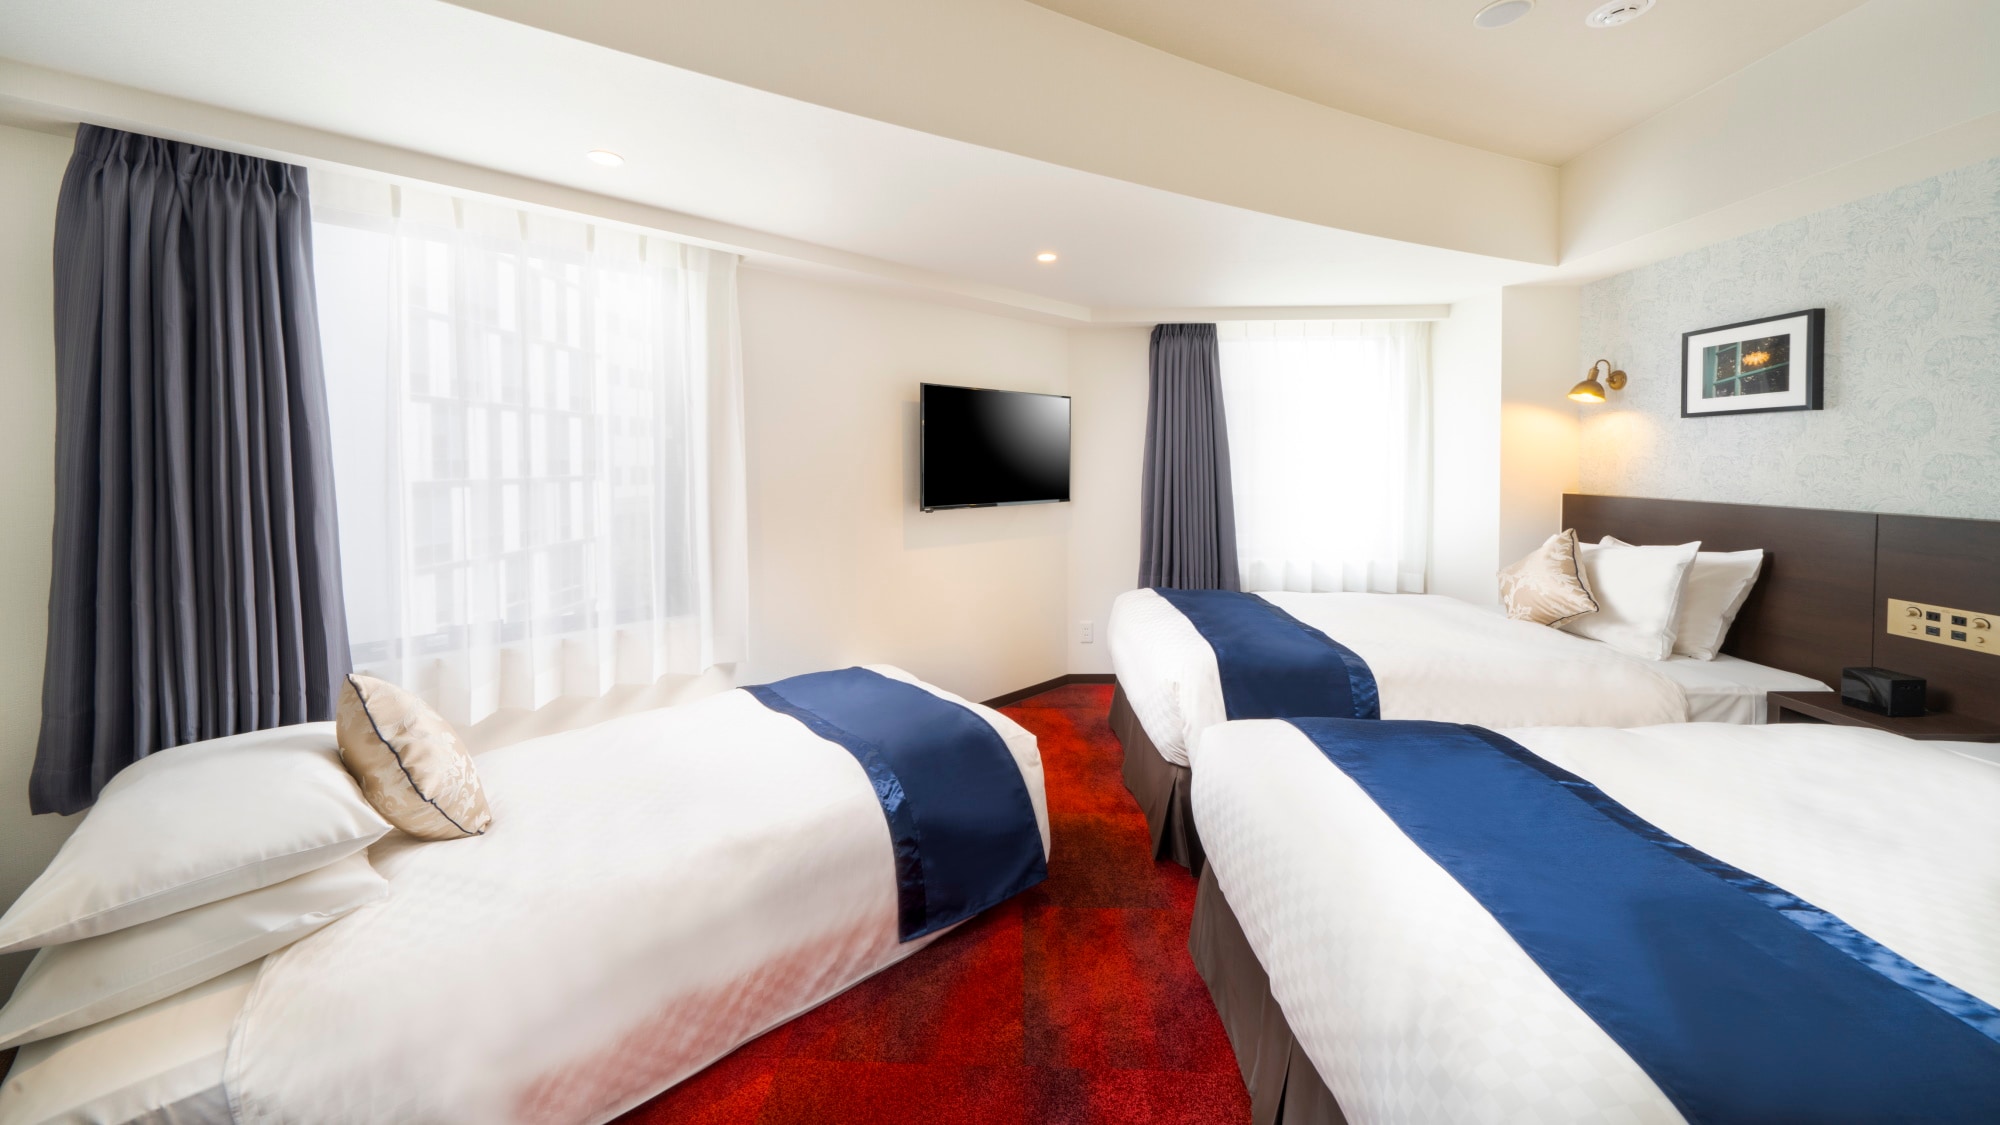 Executive Twin Room 24㎡ (for 3 people)